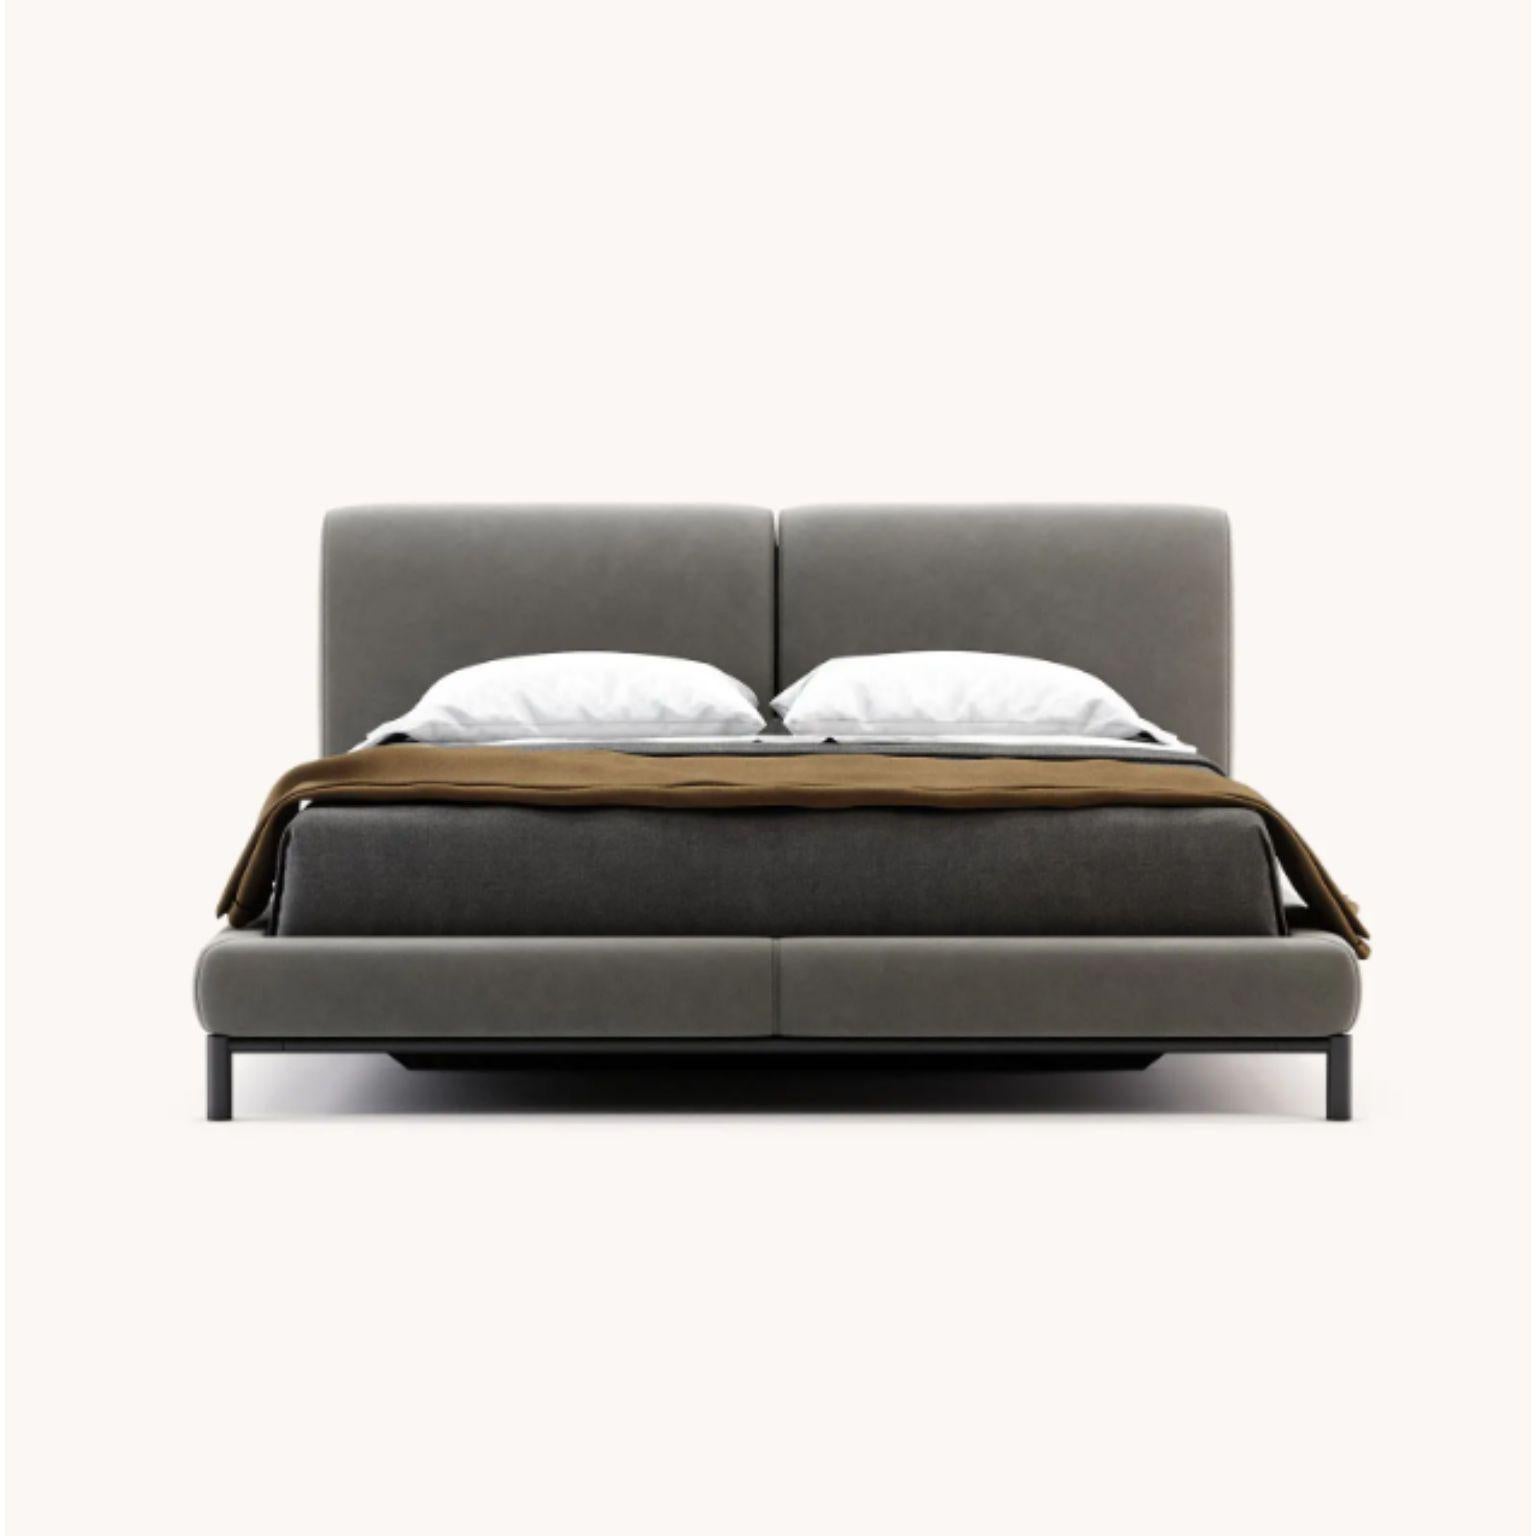 Other King Size Margot Bed by Domkapa